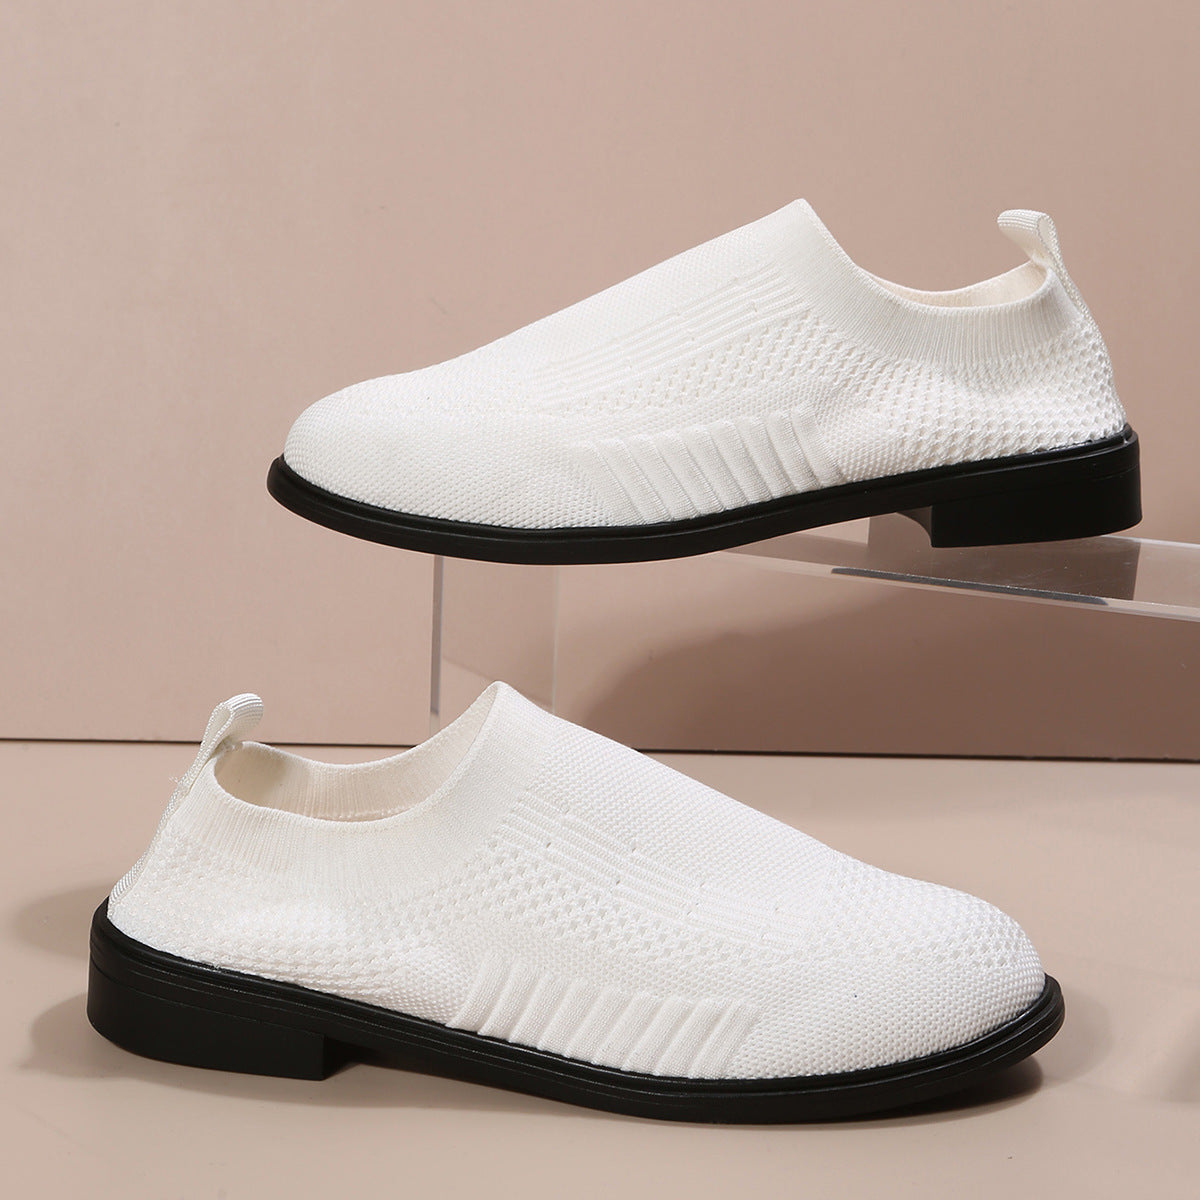 Women's Slip-Ons Shoes Block Heel Round Toe Casual Daily Walking Shoes